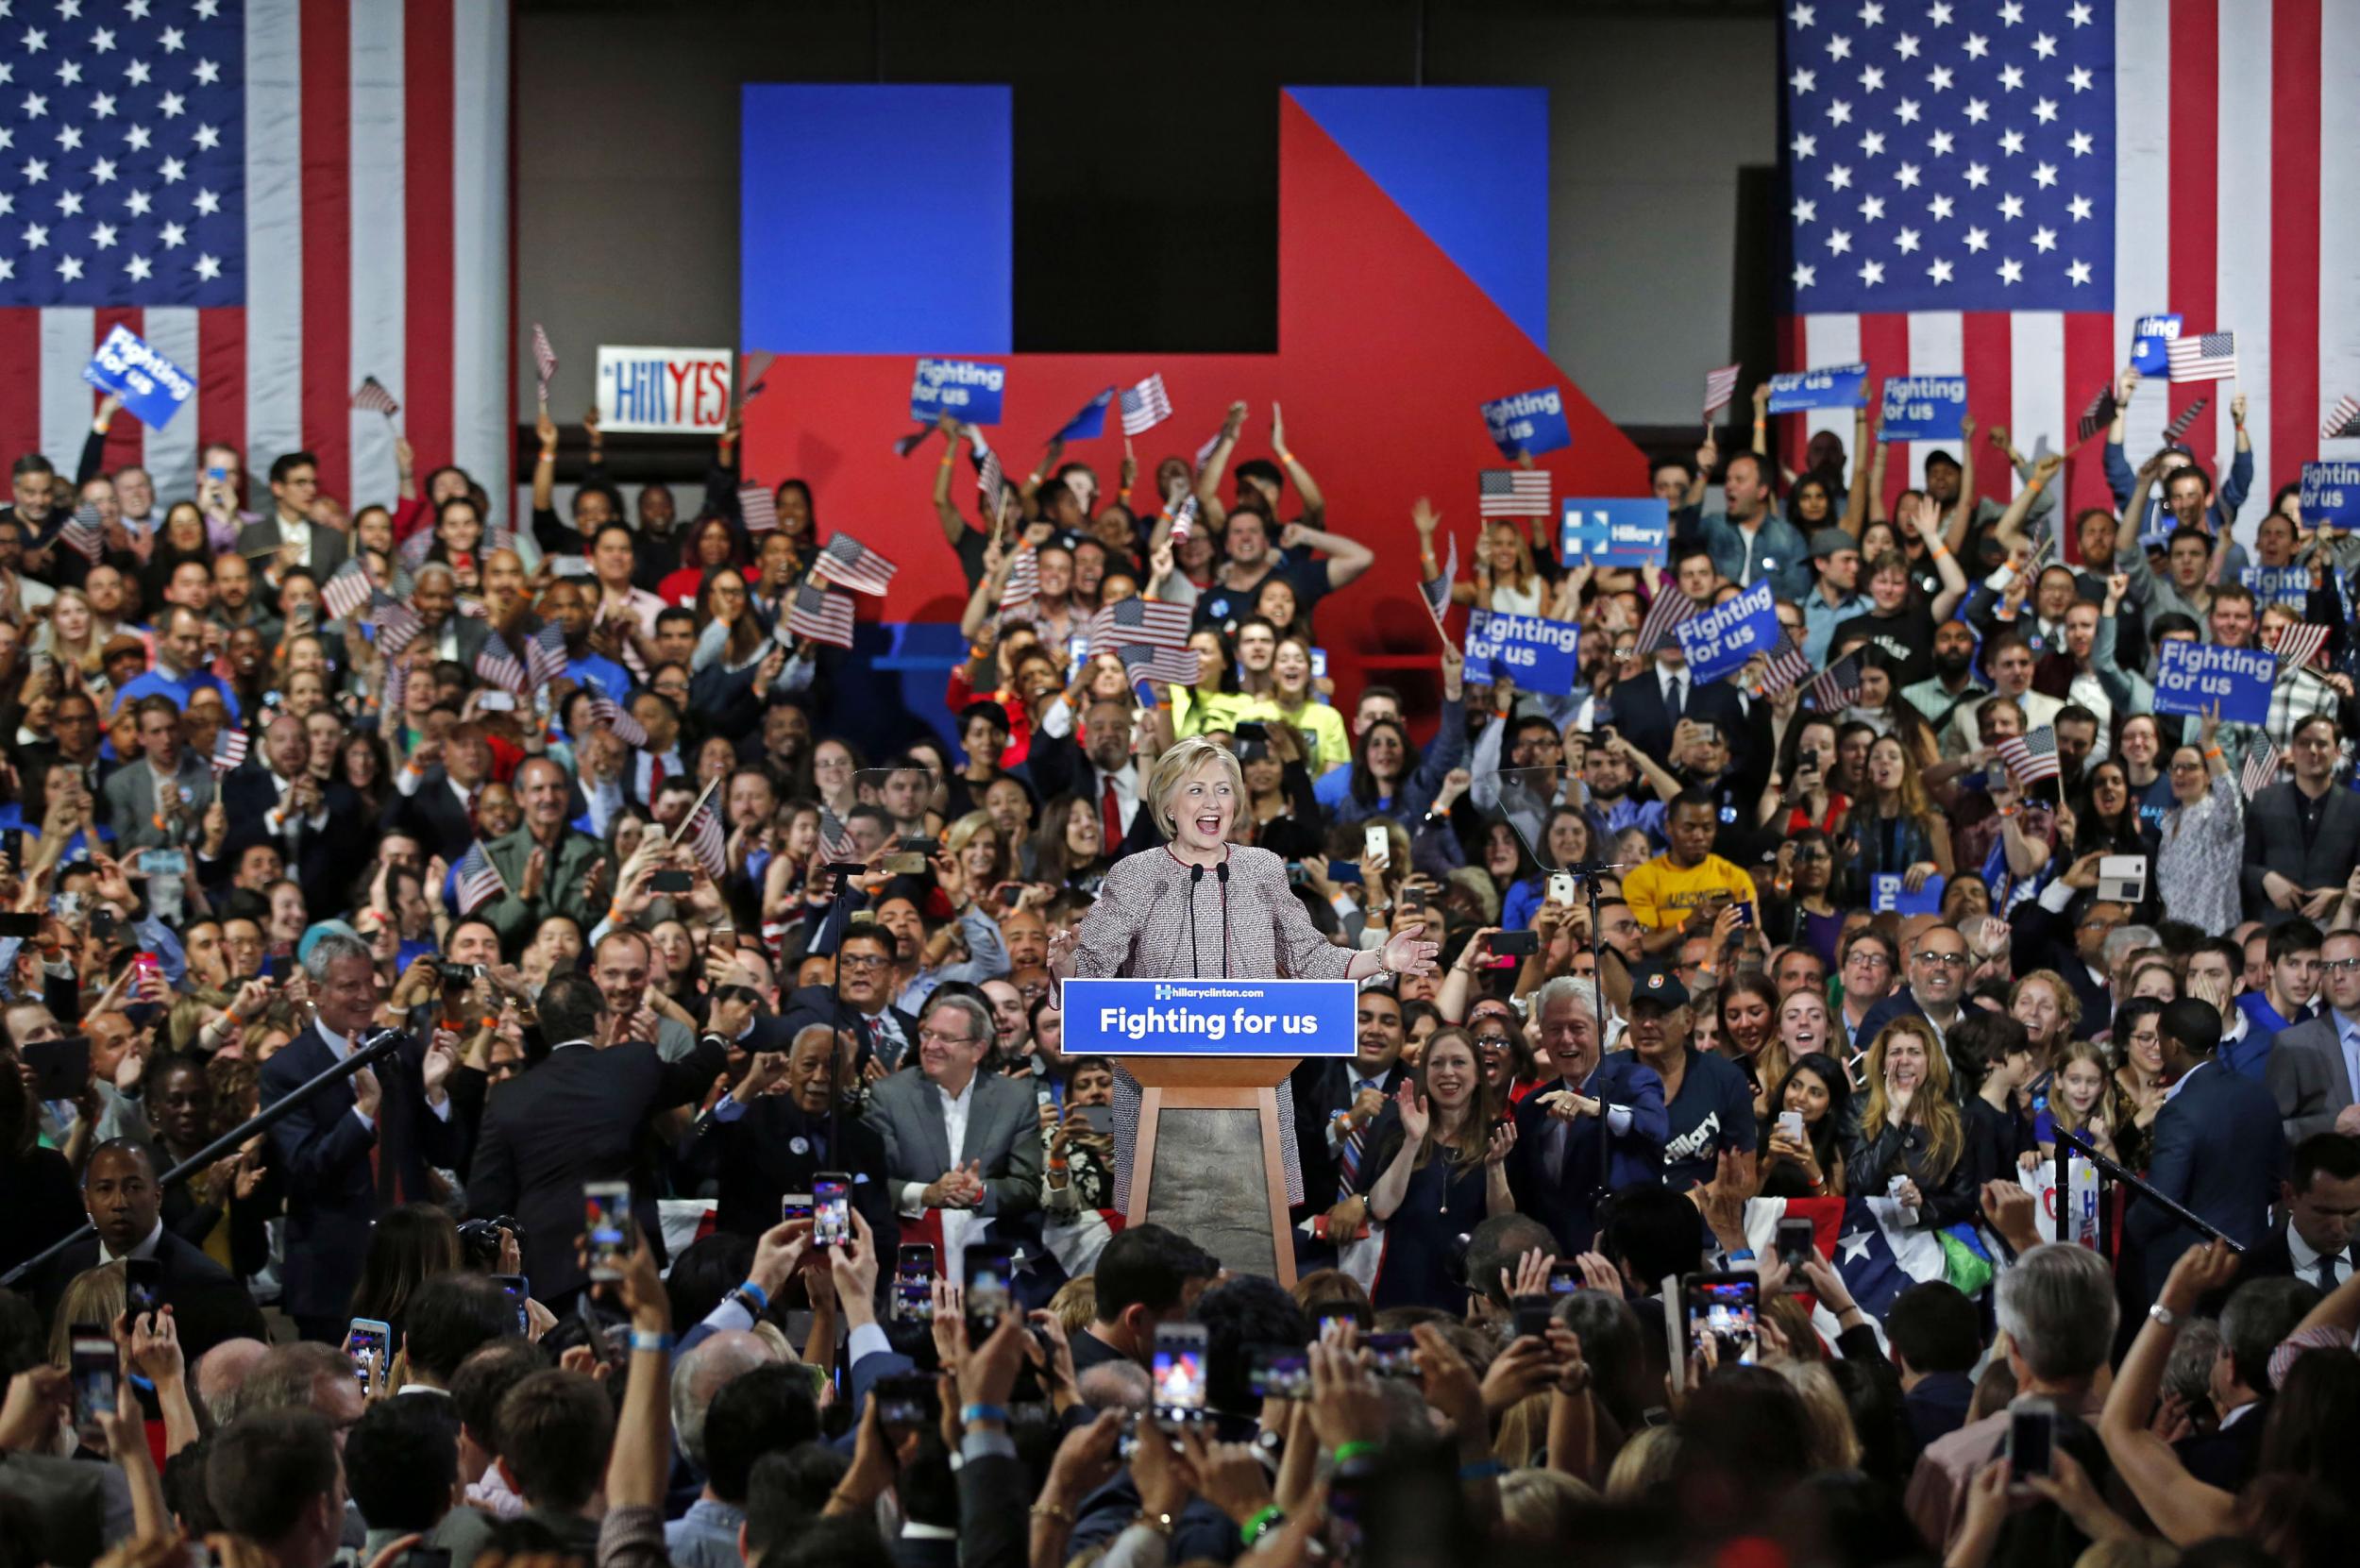 Ms Clinton spoke to supporters in New York